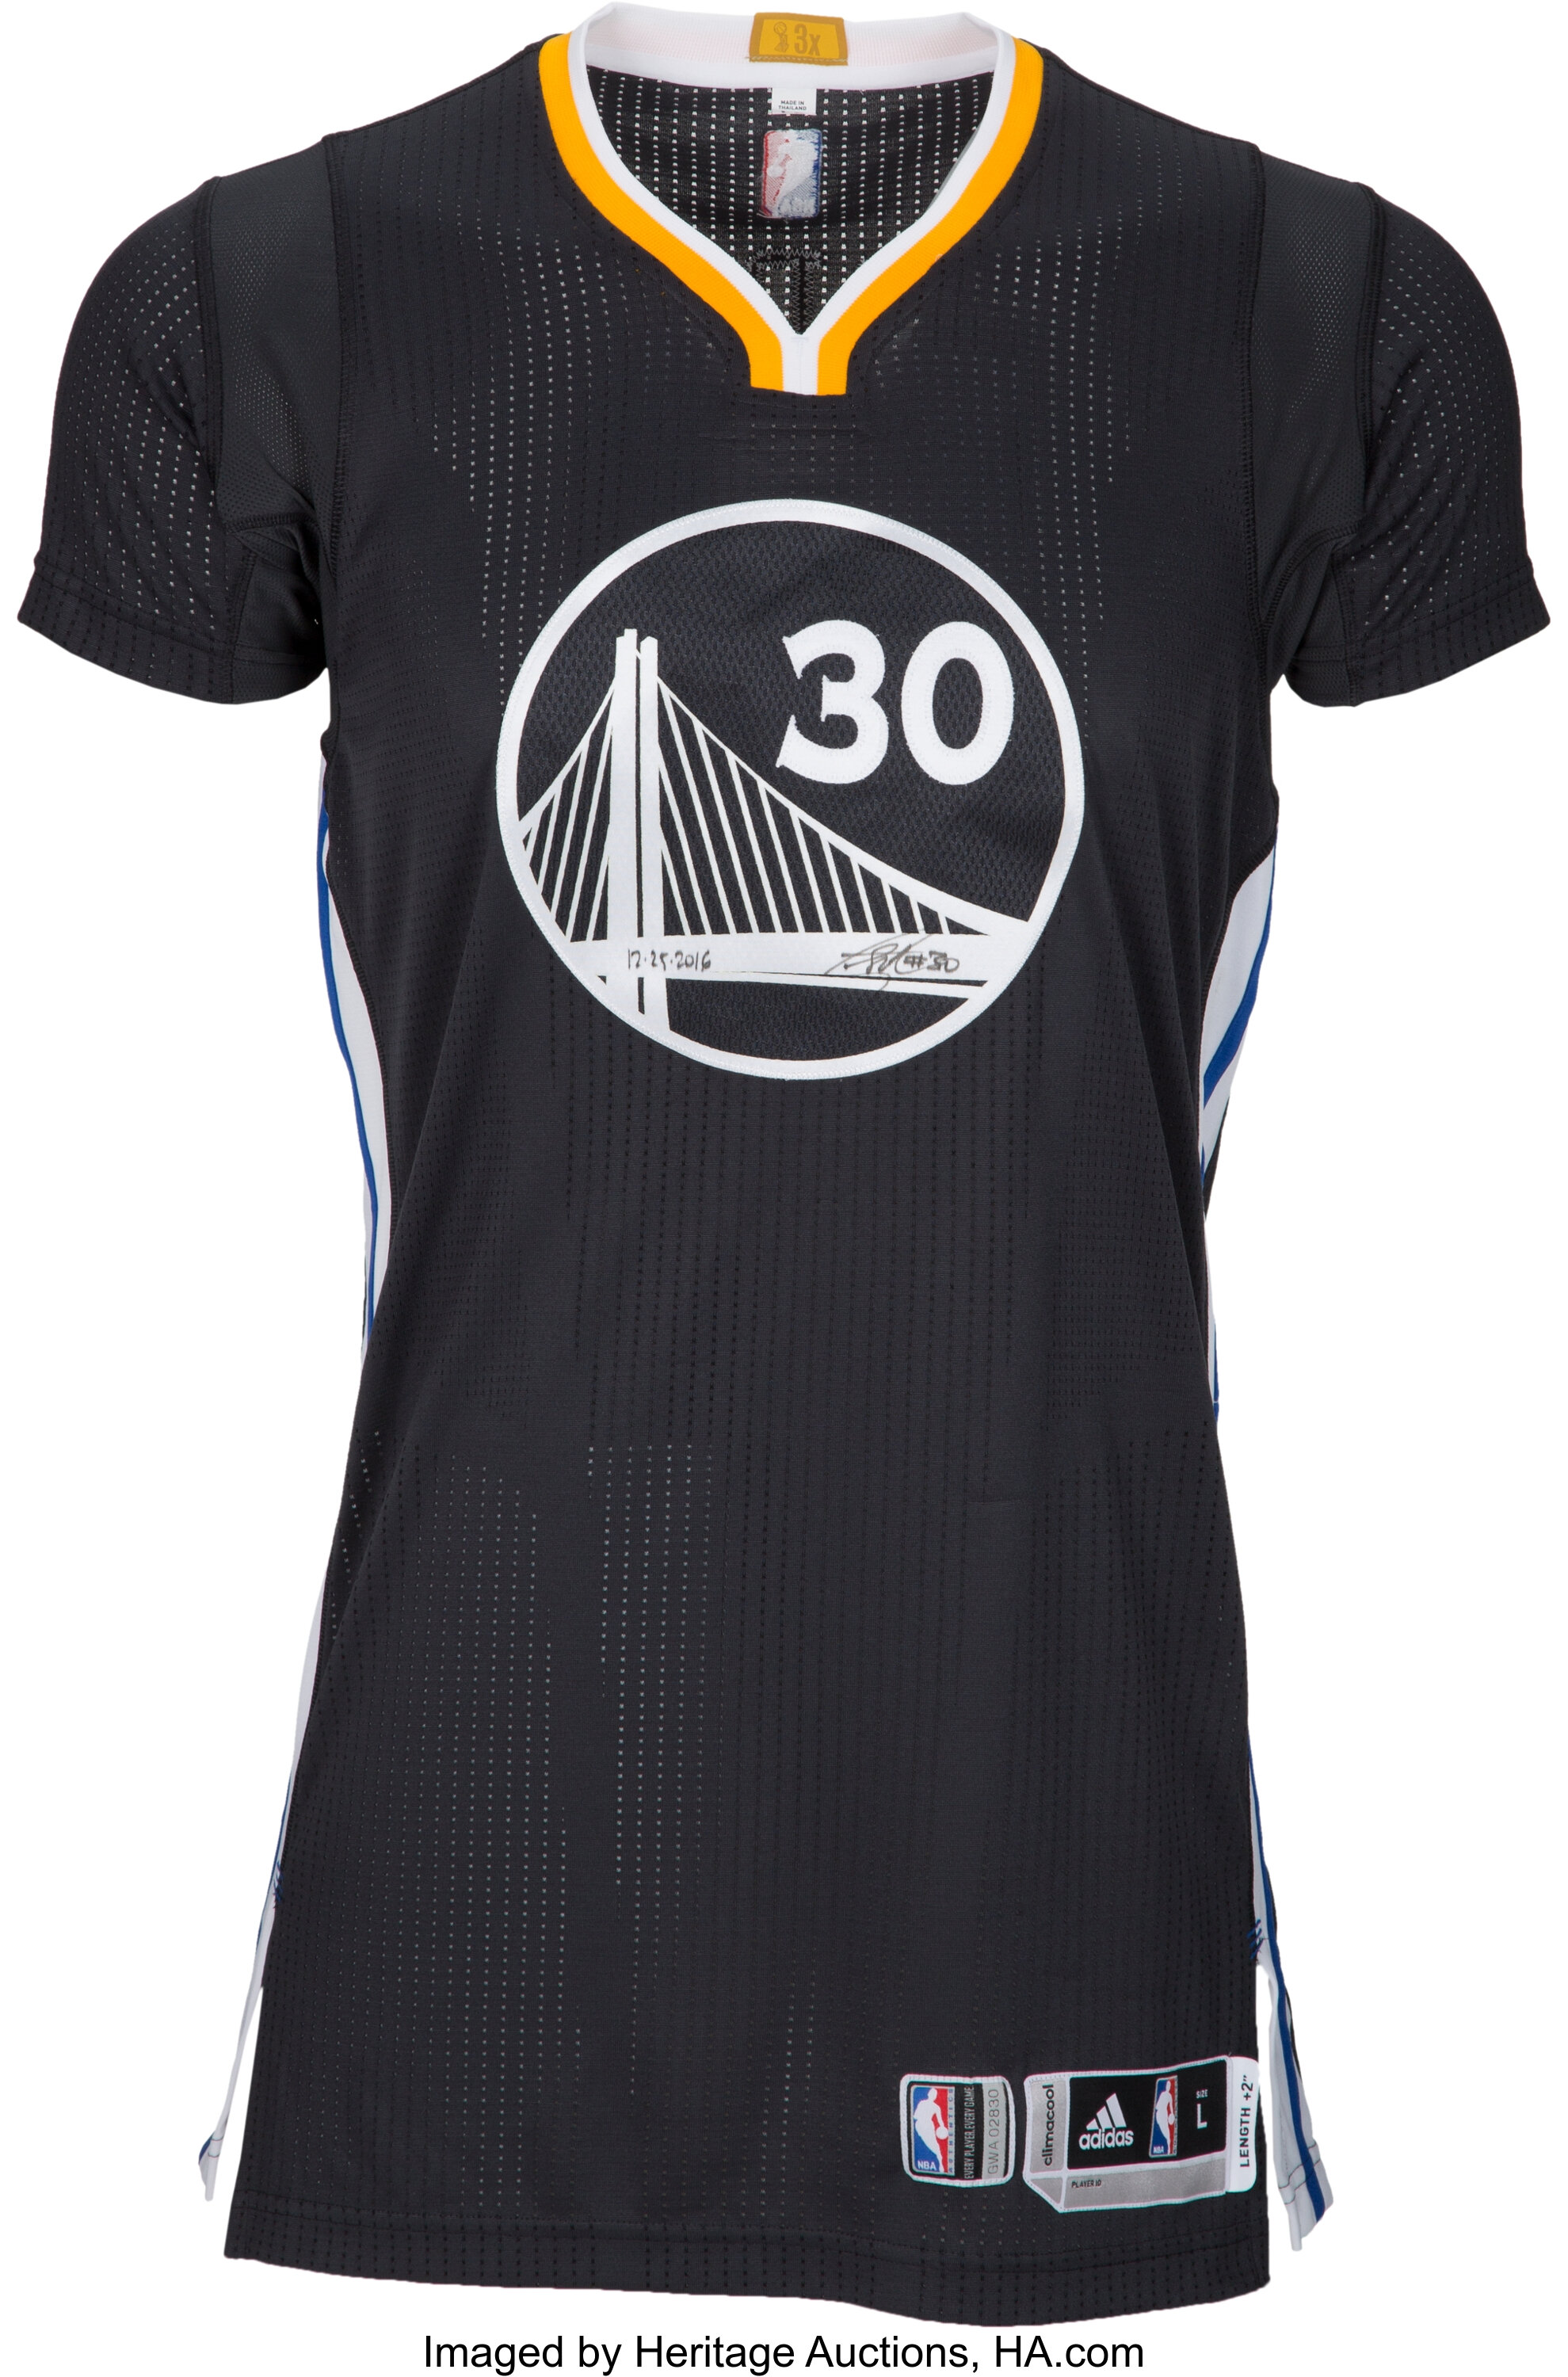 Adidas NBA 2016 All Star Game Golden State Stephen Curry #30